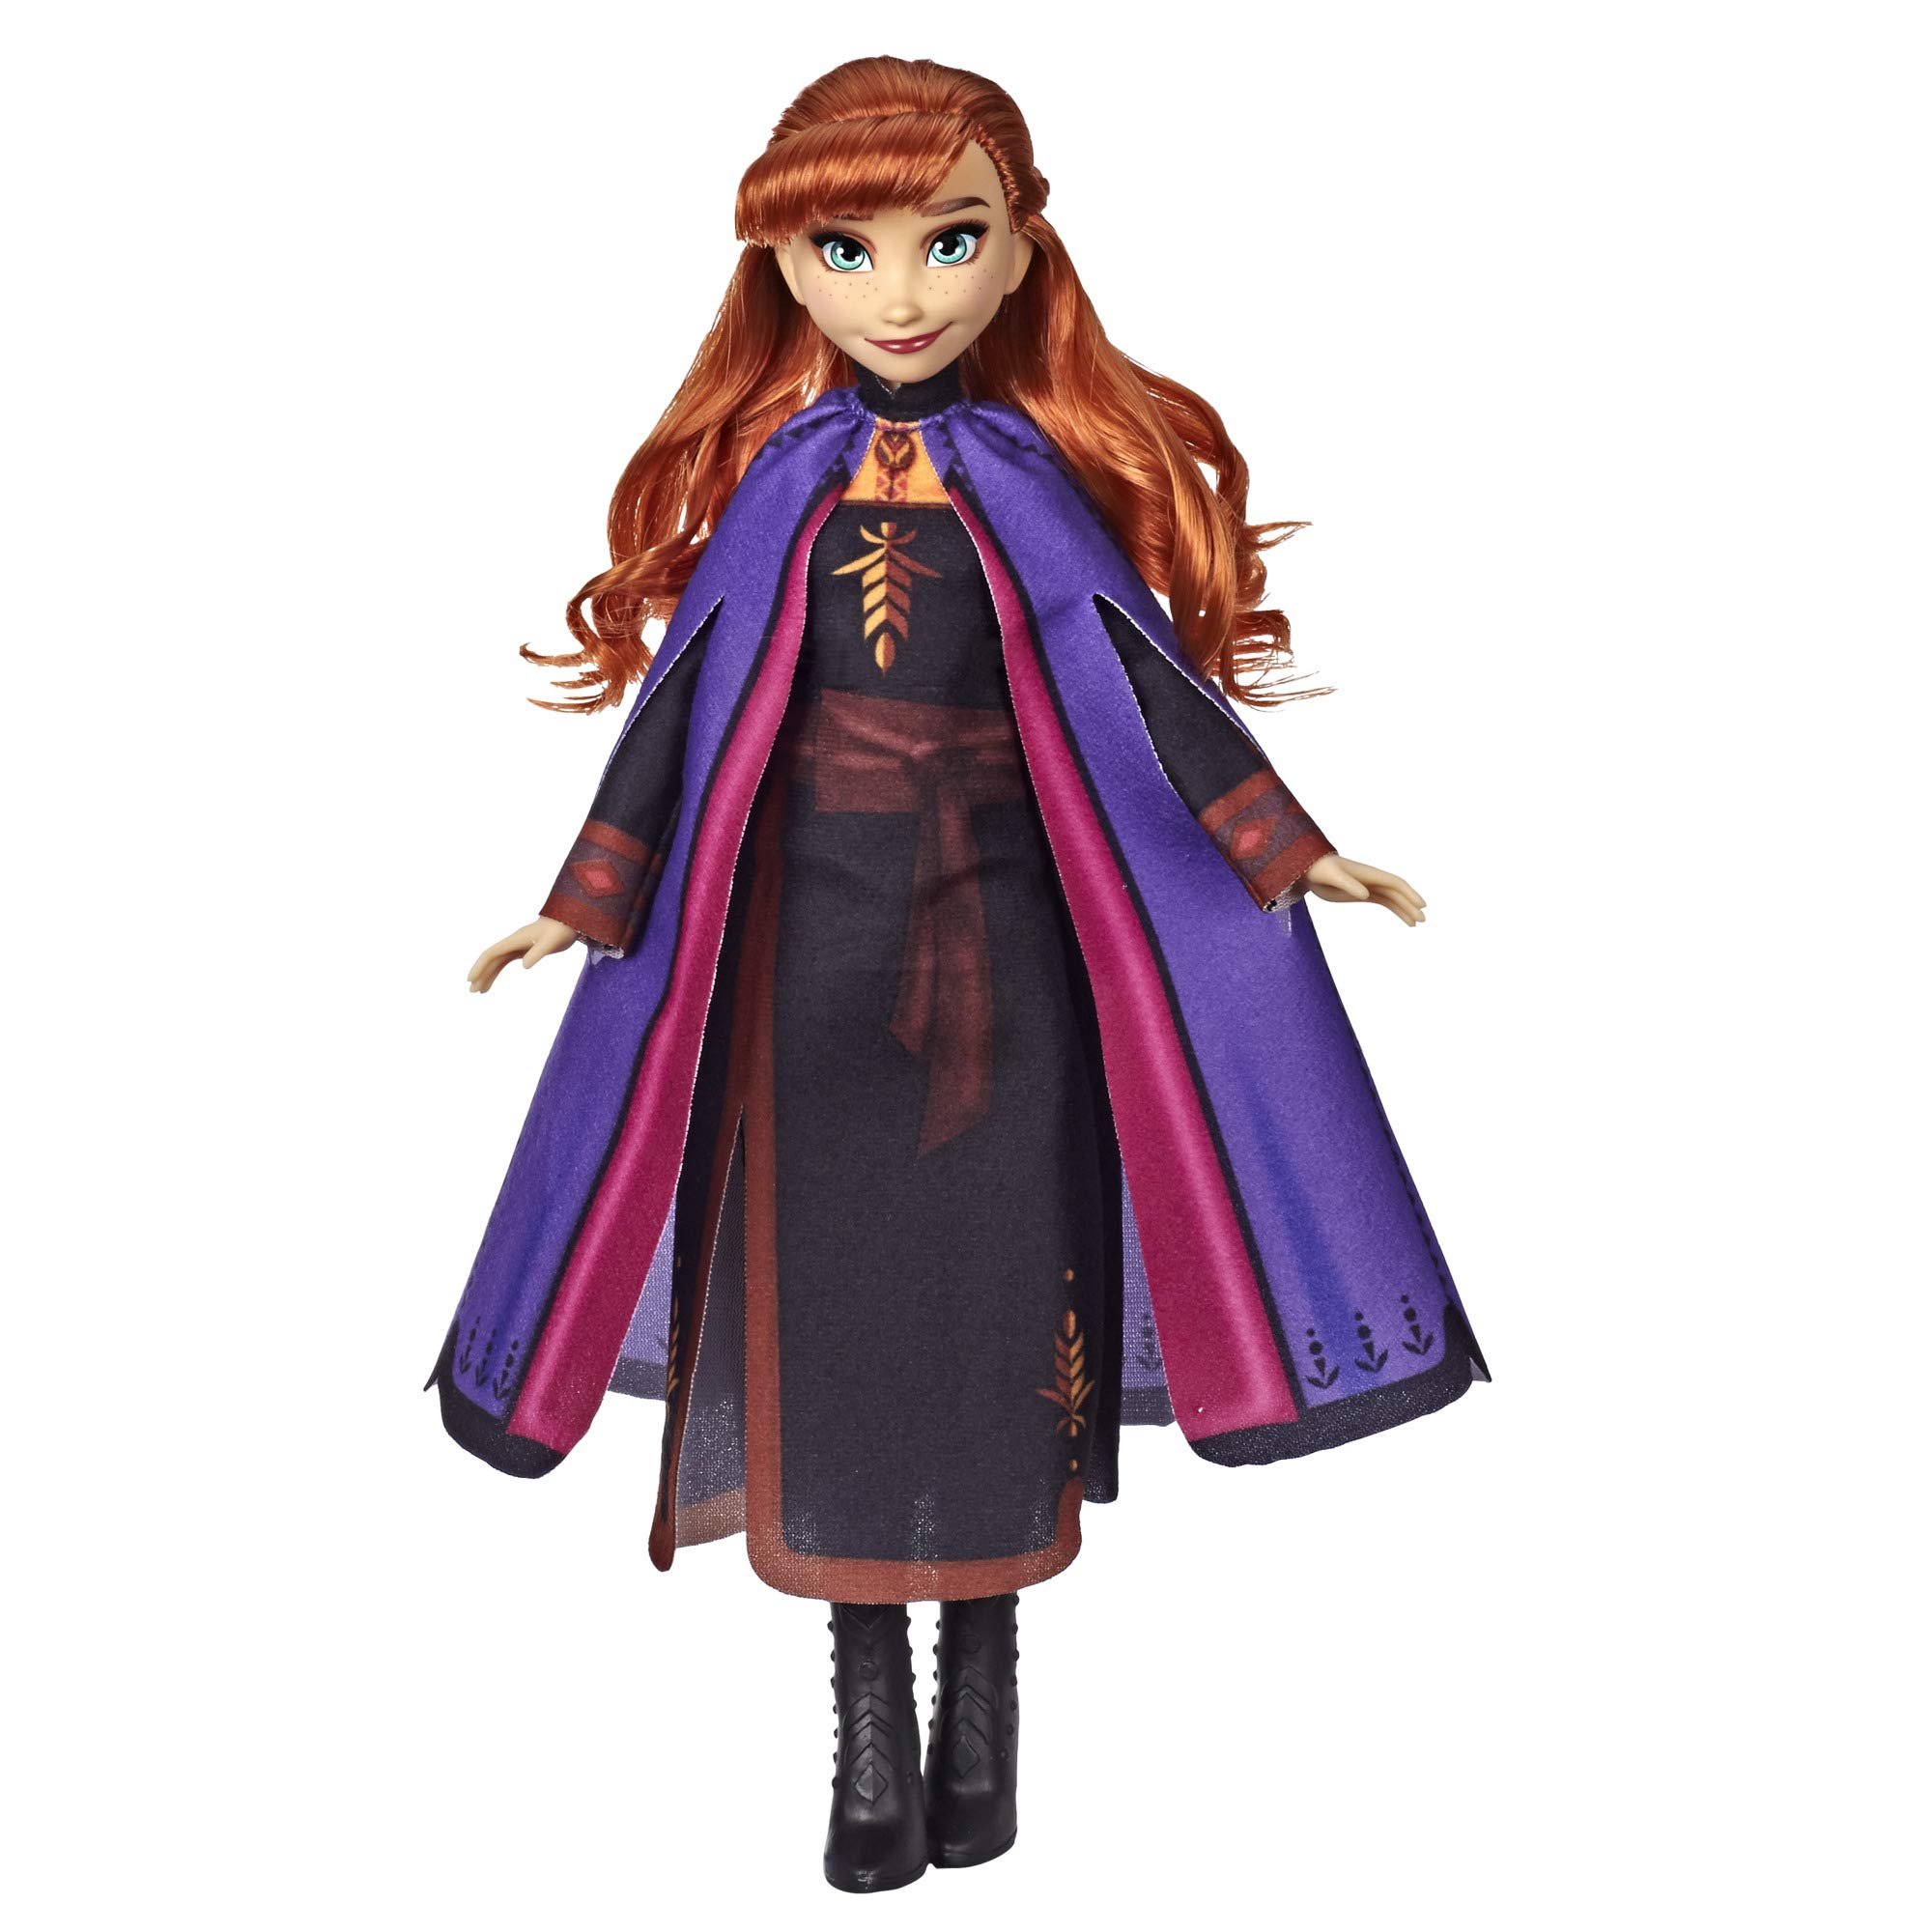 ''Disney Frozen Anna Fashion DOLL with Long Red Hair & Outfit Inspired by Frozen 2 - Toy for Kids 3 Y